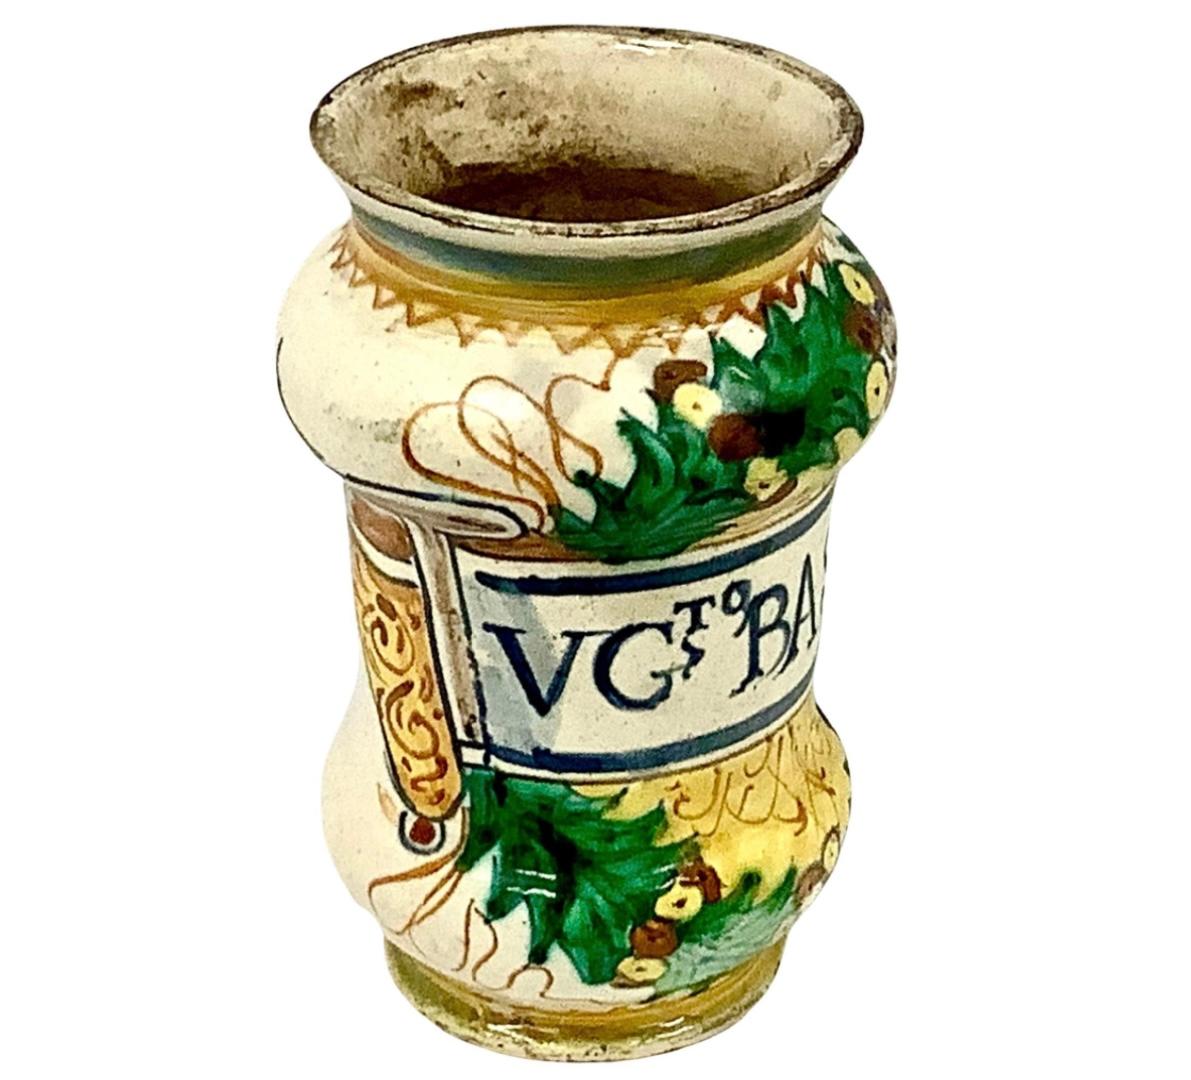 17th Century Italian Faience ceramic apothecary jar. Bright colors of yellow, green and dark blue on cream background. In writing is 